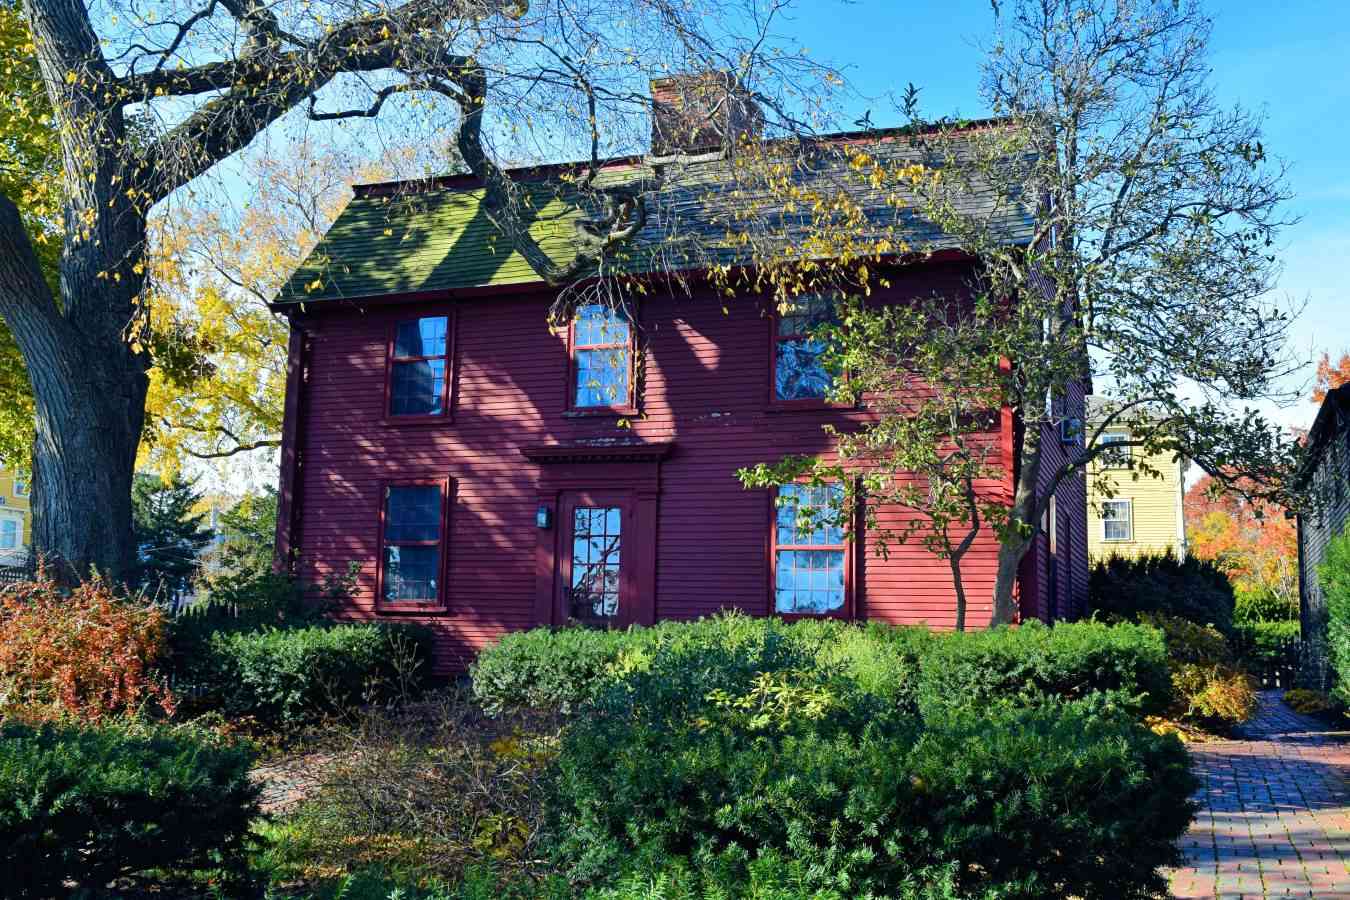 Salem Witch Trials Self-Guided Walking Tour